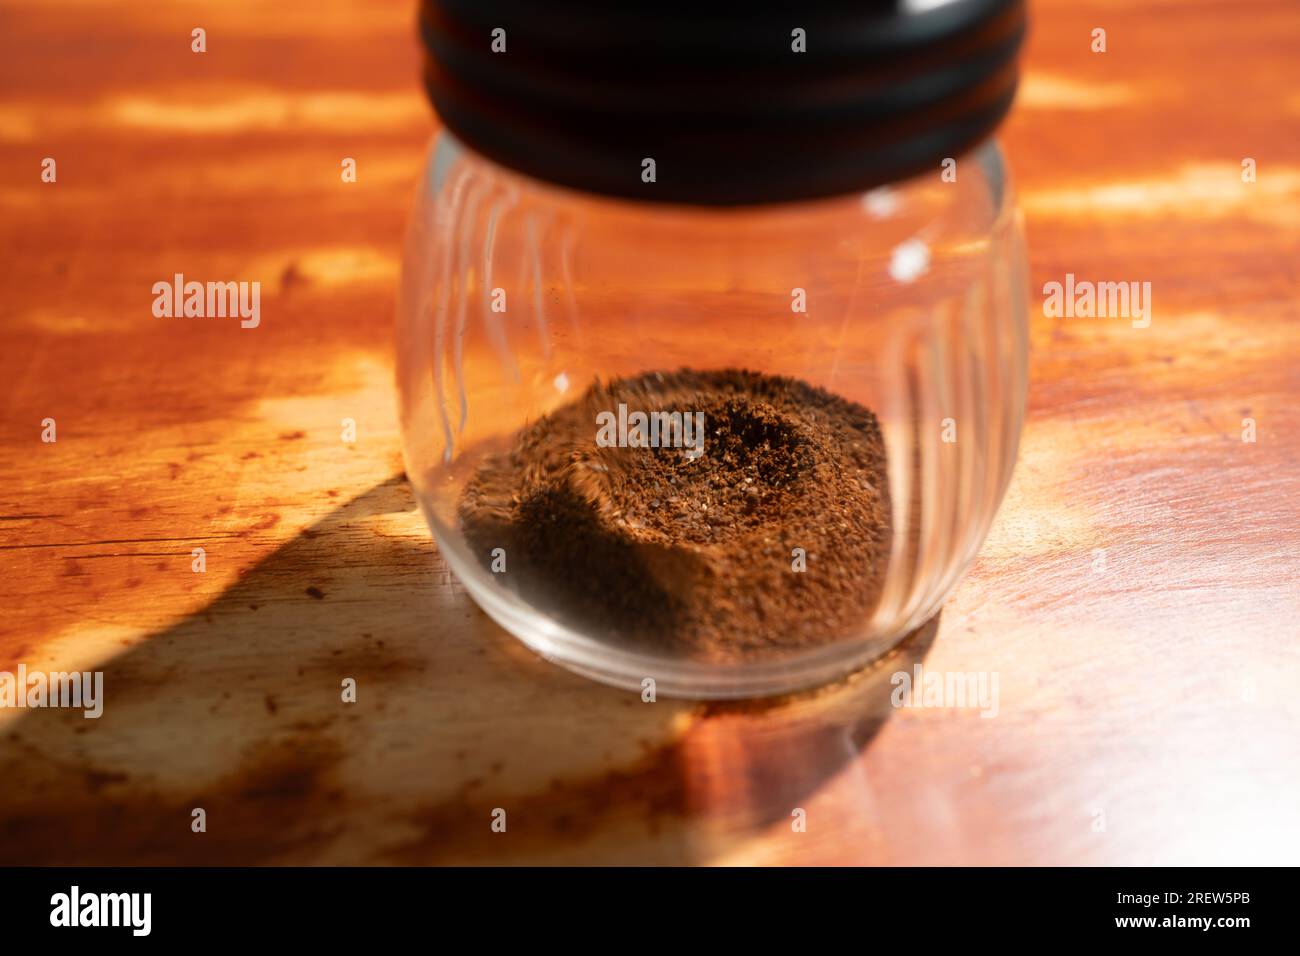 Ground coffee bean in a coffee grinder Stock Photo